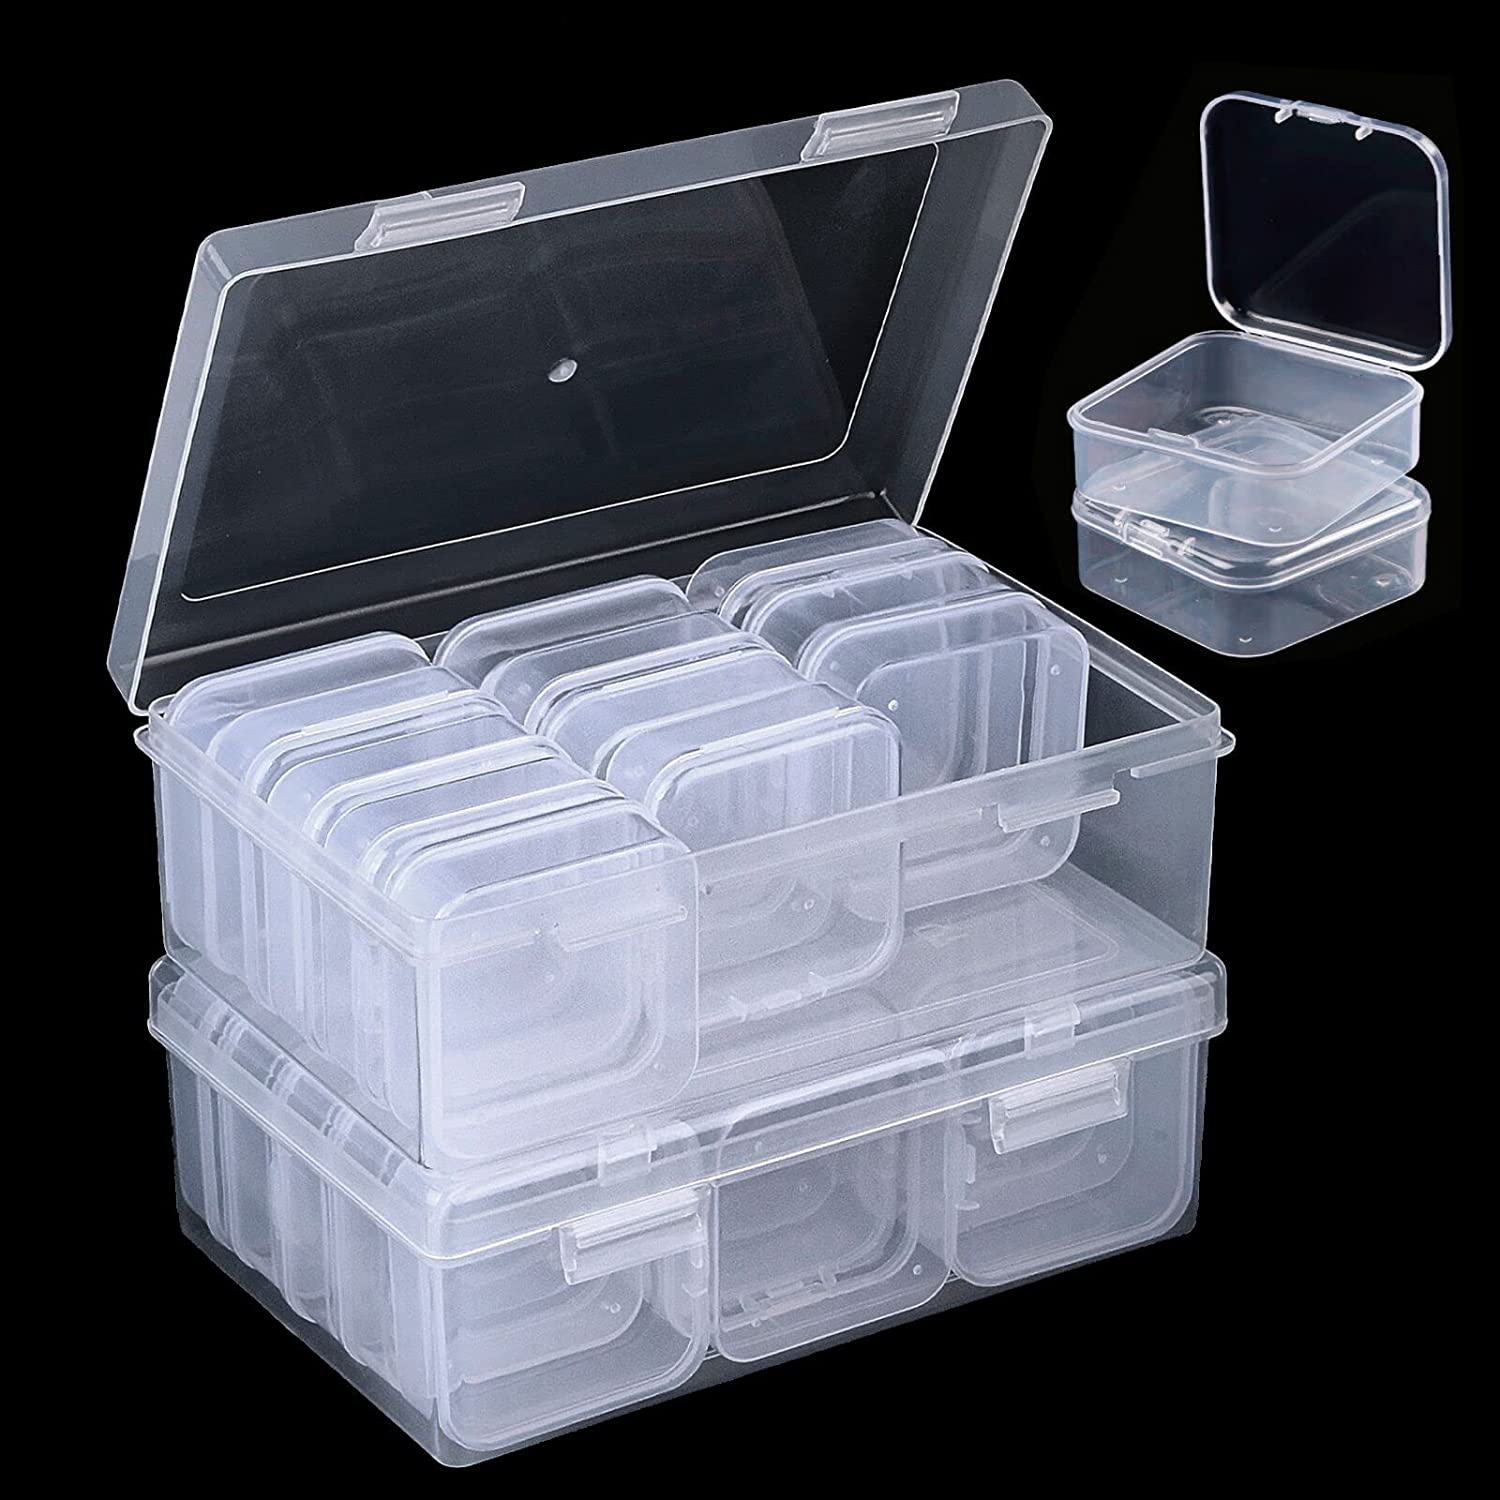 12 Pieces Small Clear Plastic Beads Storage Container and Organizer  Transparent Boxes with Hinged Lid for Storage of Small Items, Jewelry,  Diamonds, DIY Art Craft Accessory 2.12 x 2.12 x 0.79 Inch